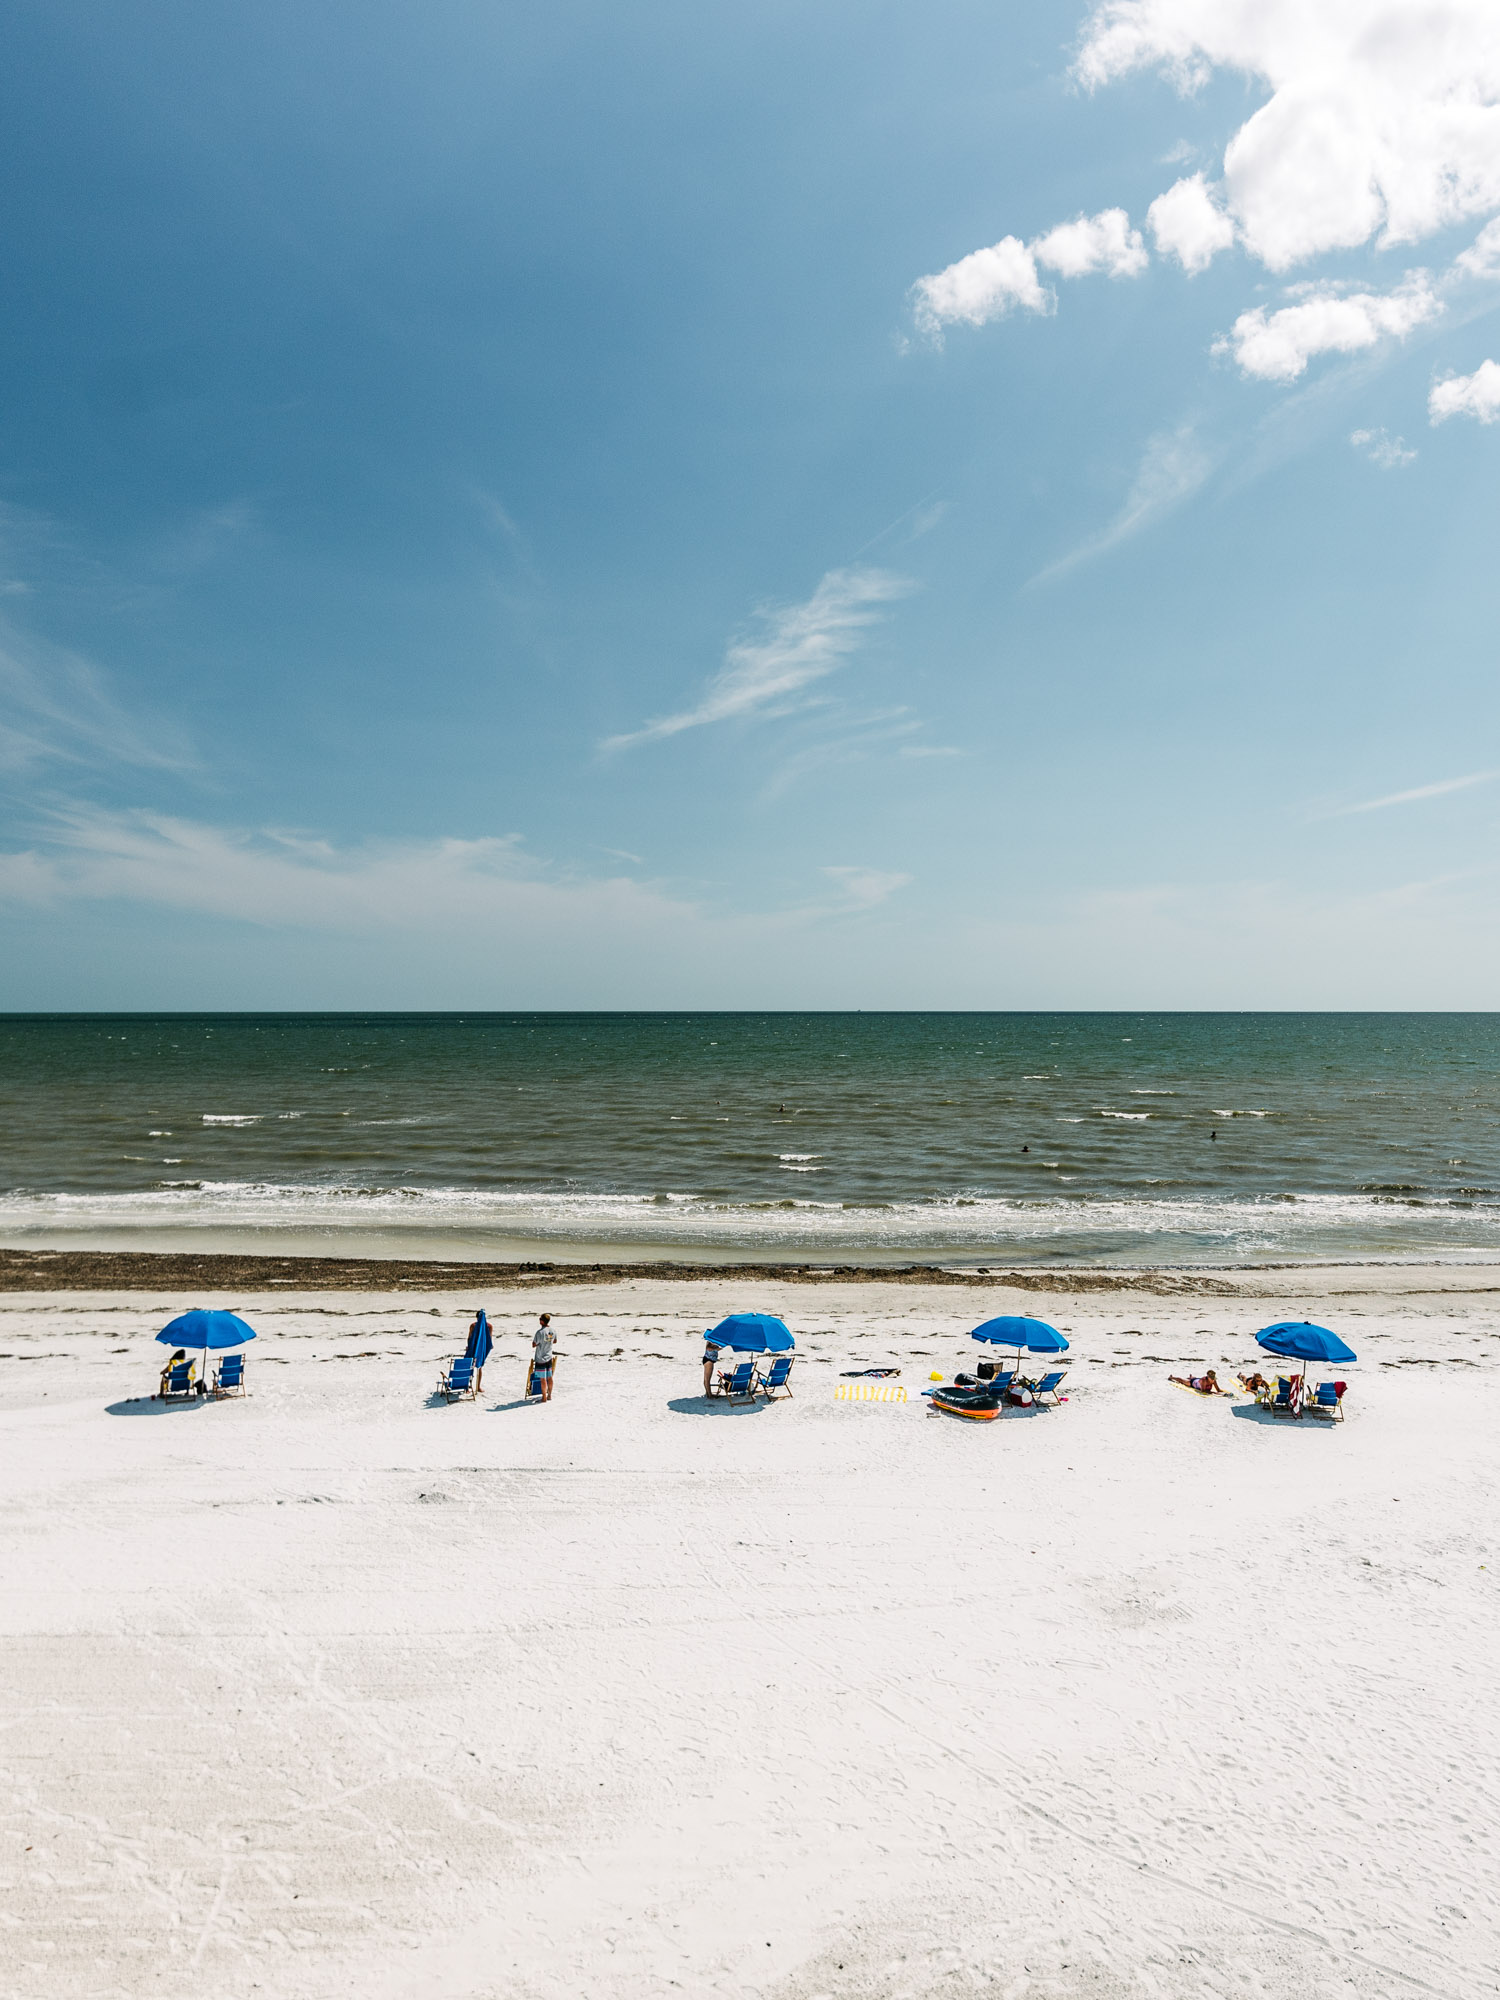 Jeff On The Road - The Beaches of Fort Myers and Sanibel Island - Sandpiper Gulf Resort